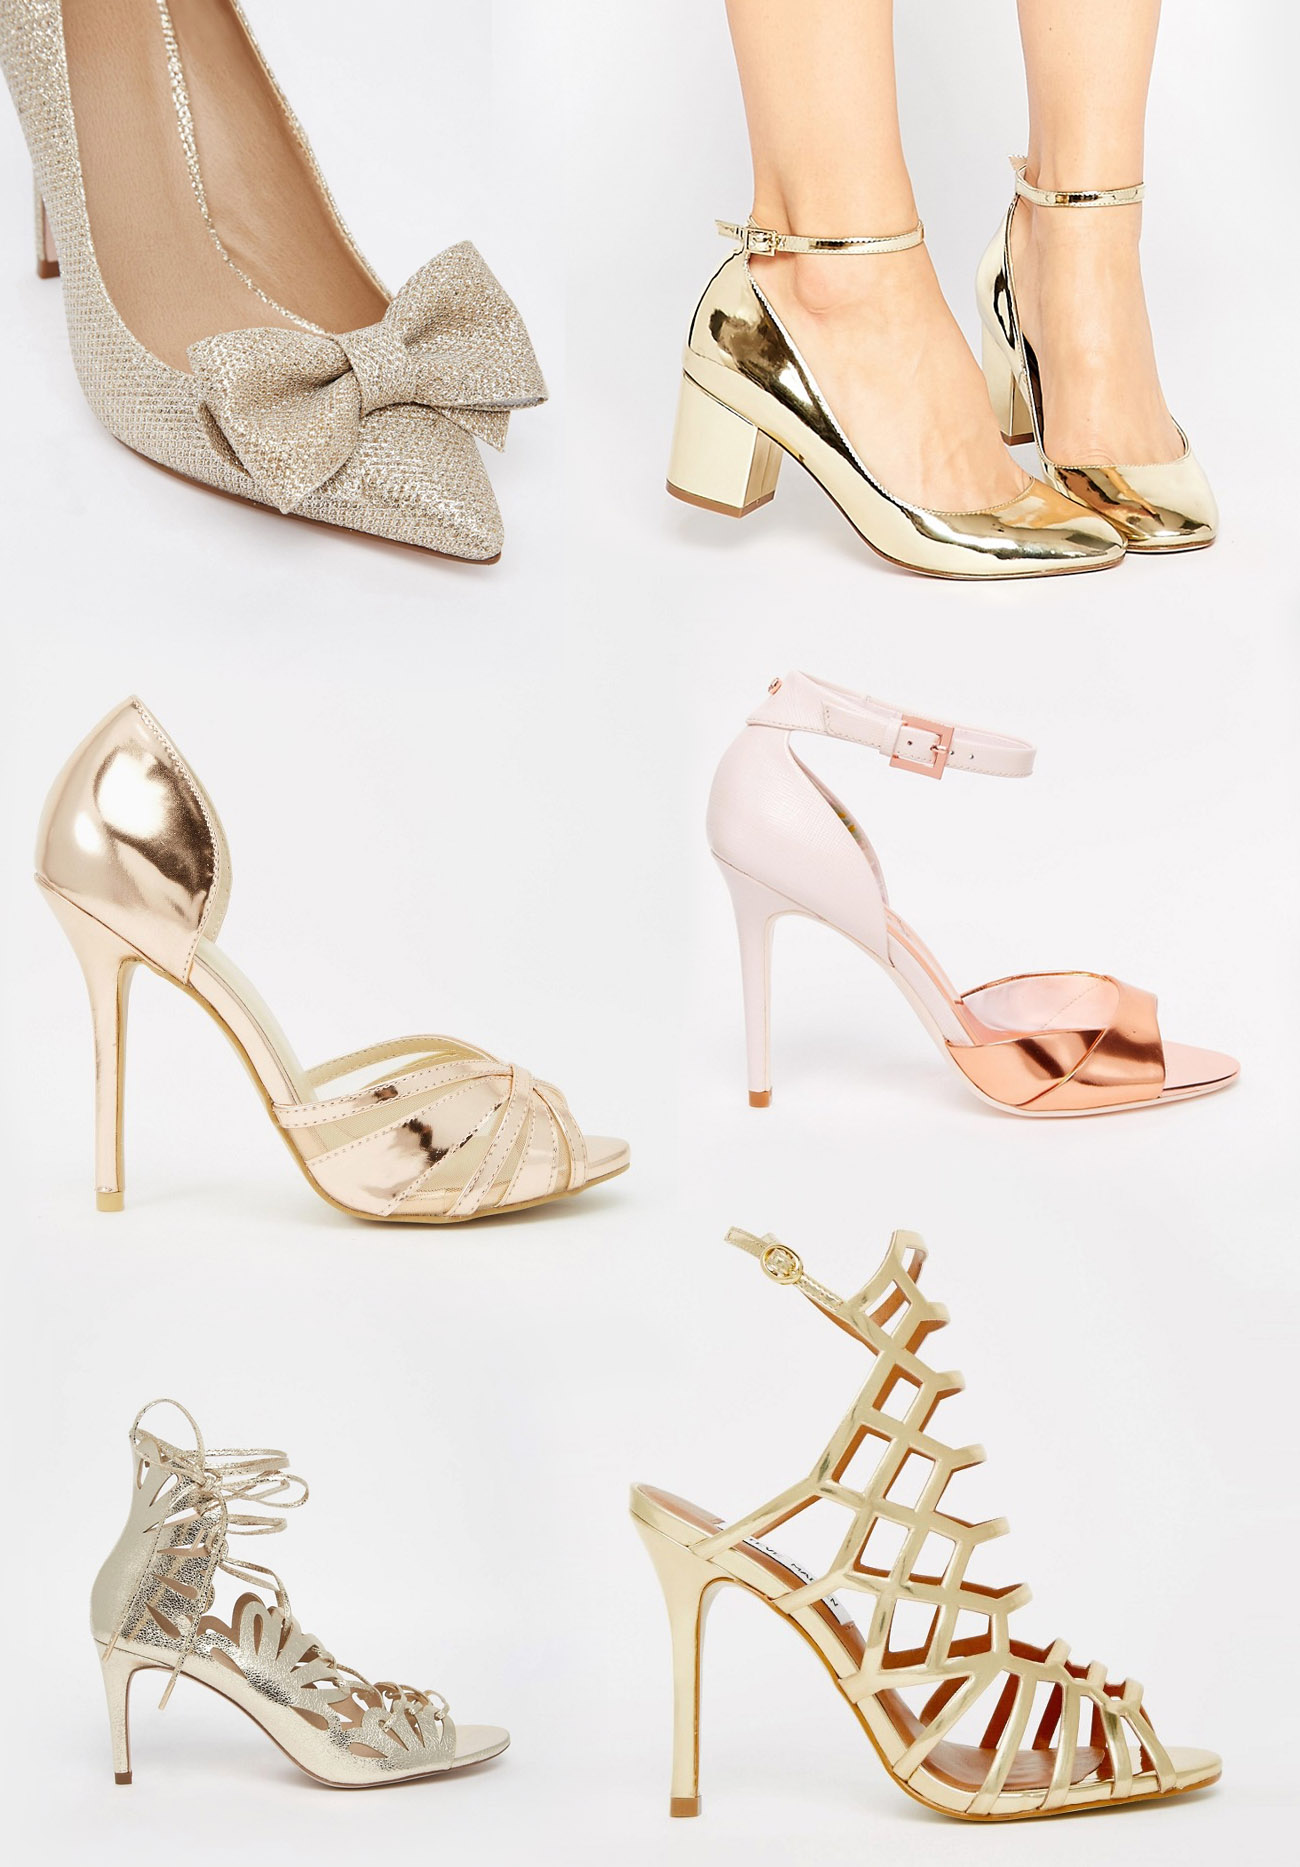 The Best Metallic Shoes